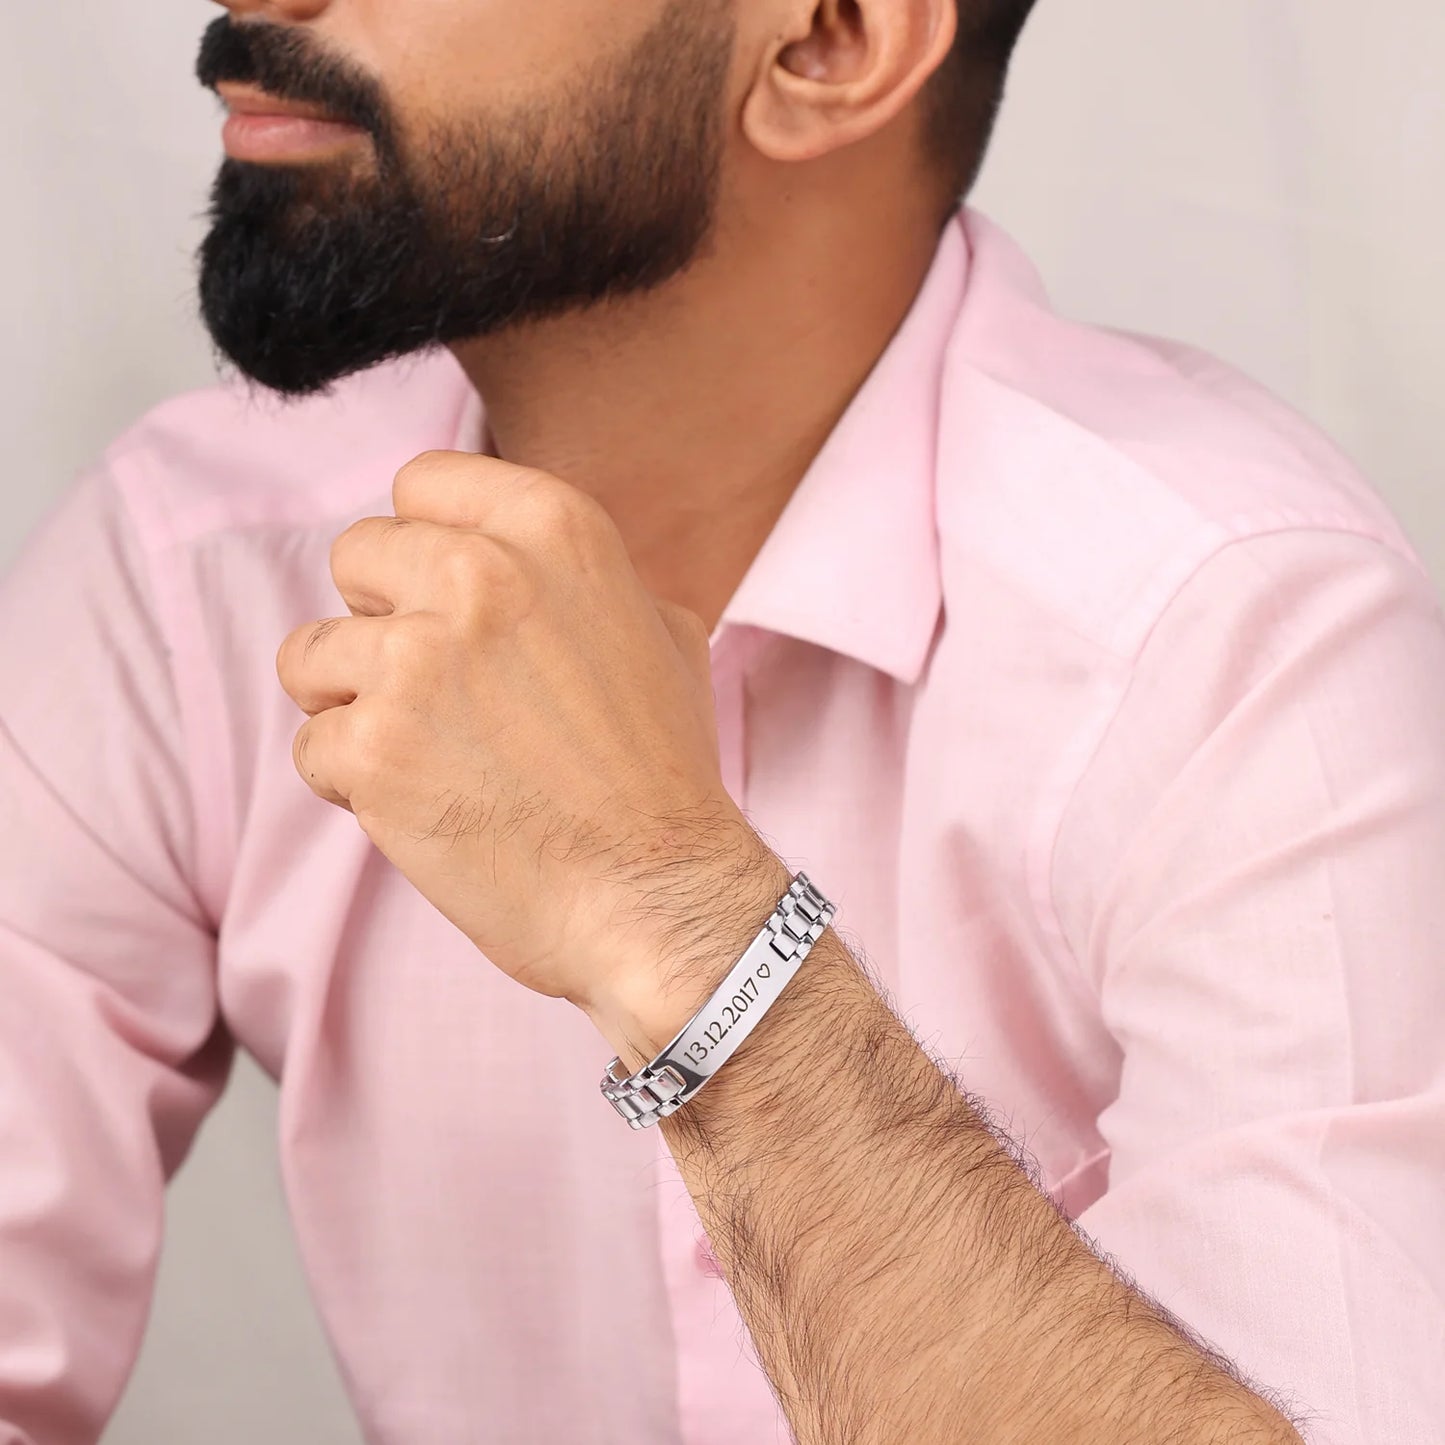   Elevate Your Style: Silver Bracelets for Men | Rugged, Modern, Durable